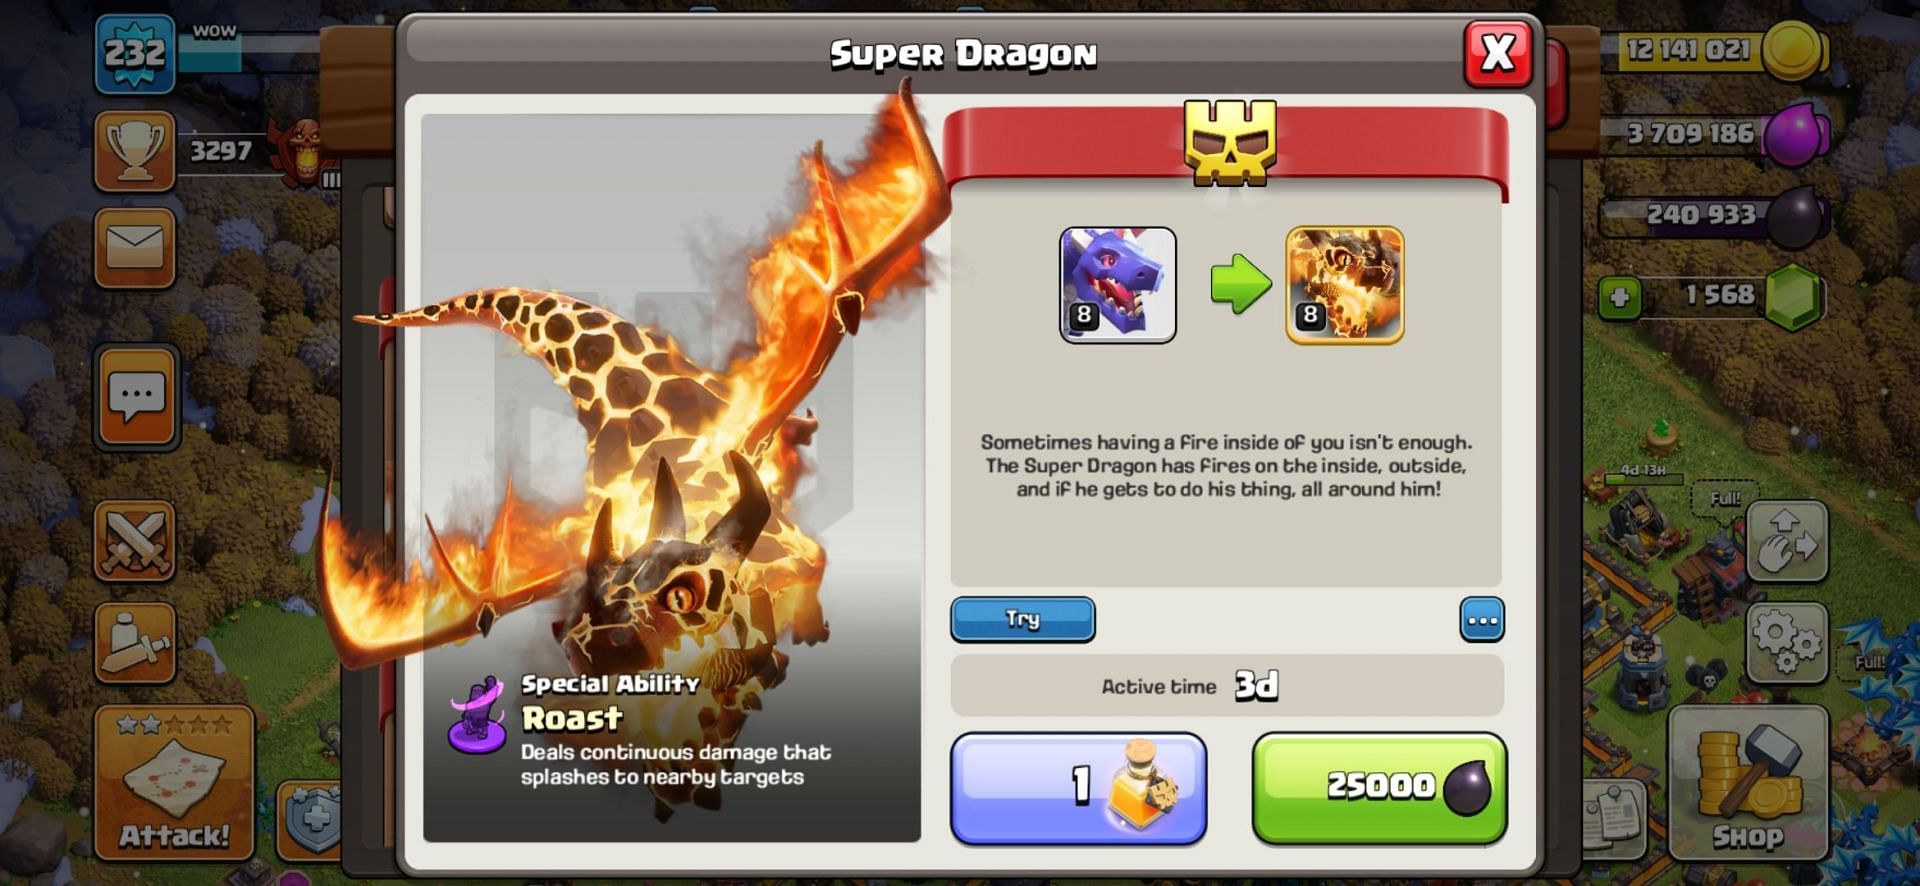 dragons clash of clans